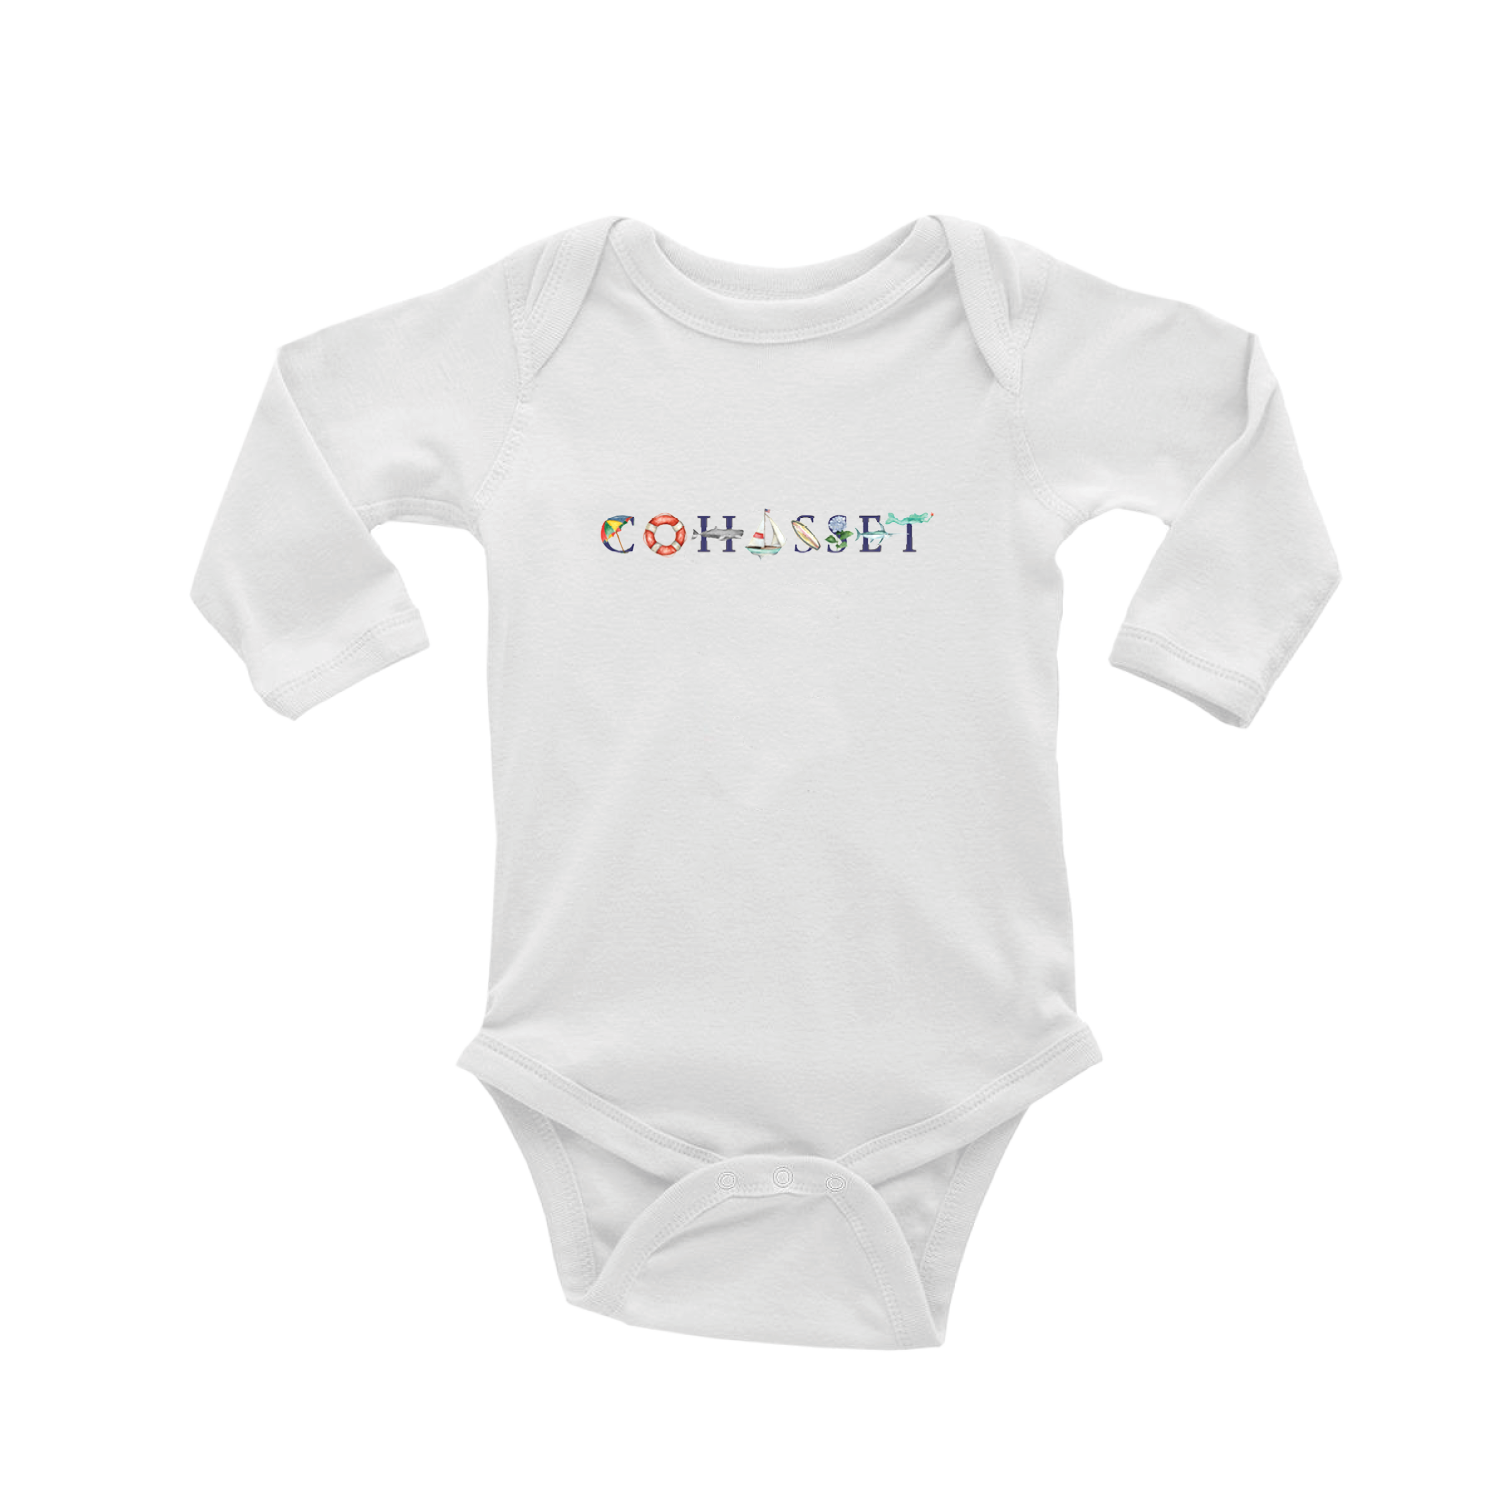 Cohasset baby snap up long sleeve